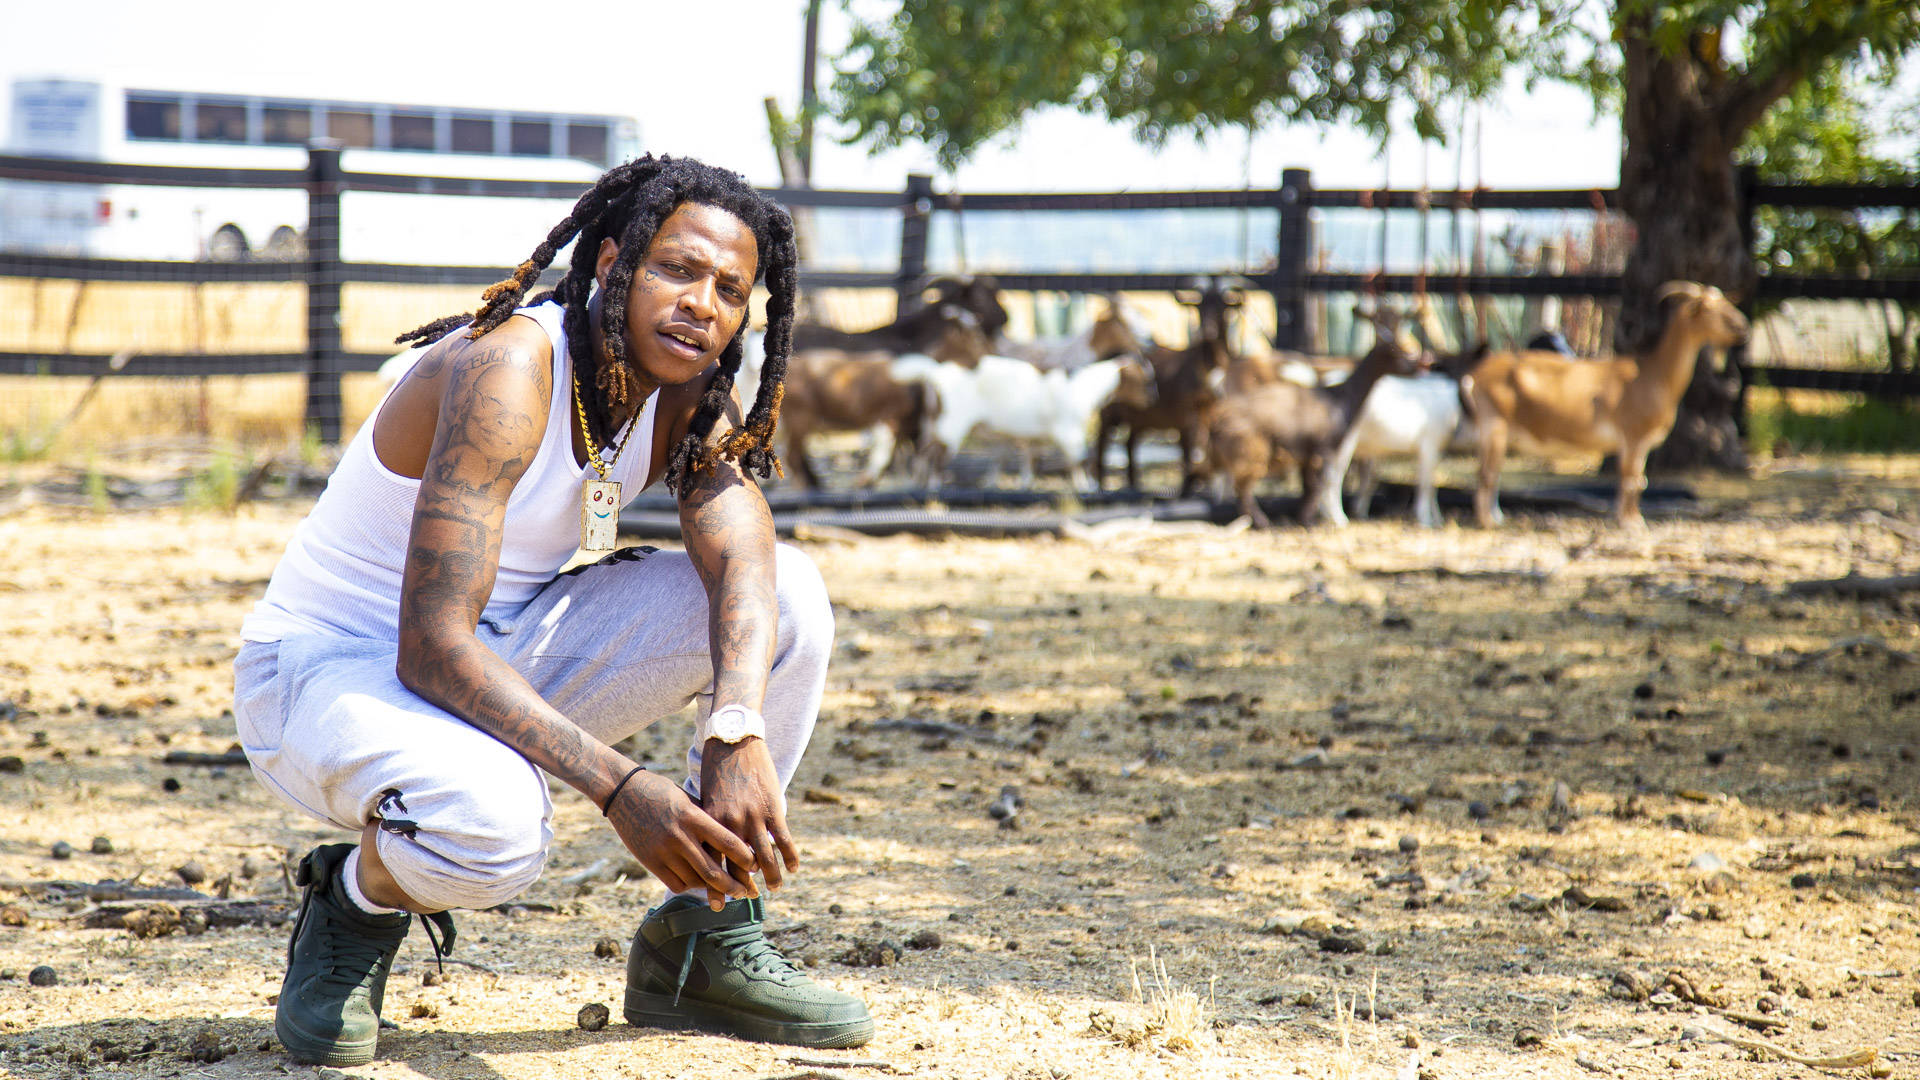 Among hay bales and baby goats, the Bay Area rap star discusses leaving Vallejo, police brutality and his new album, 'The Big Chang Theory.' Estefany Gonzalez